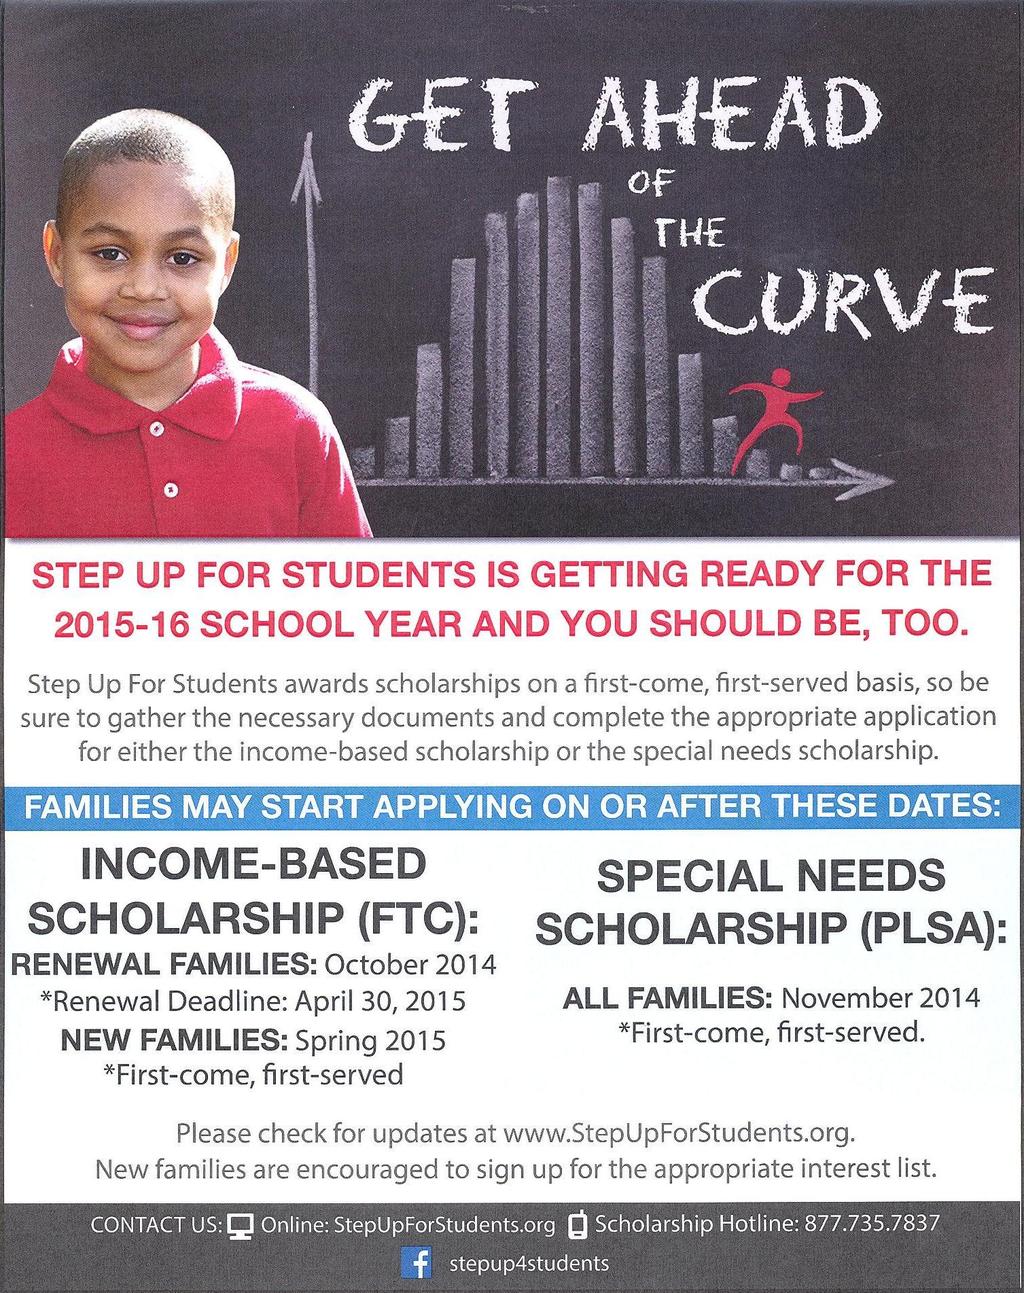 IMPORTANT INFORMATION FOR STEP UP FOR STUDENTS The 2015-16 scholarship application season for renewal families is now open.